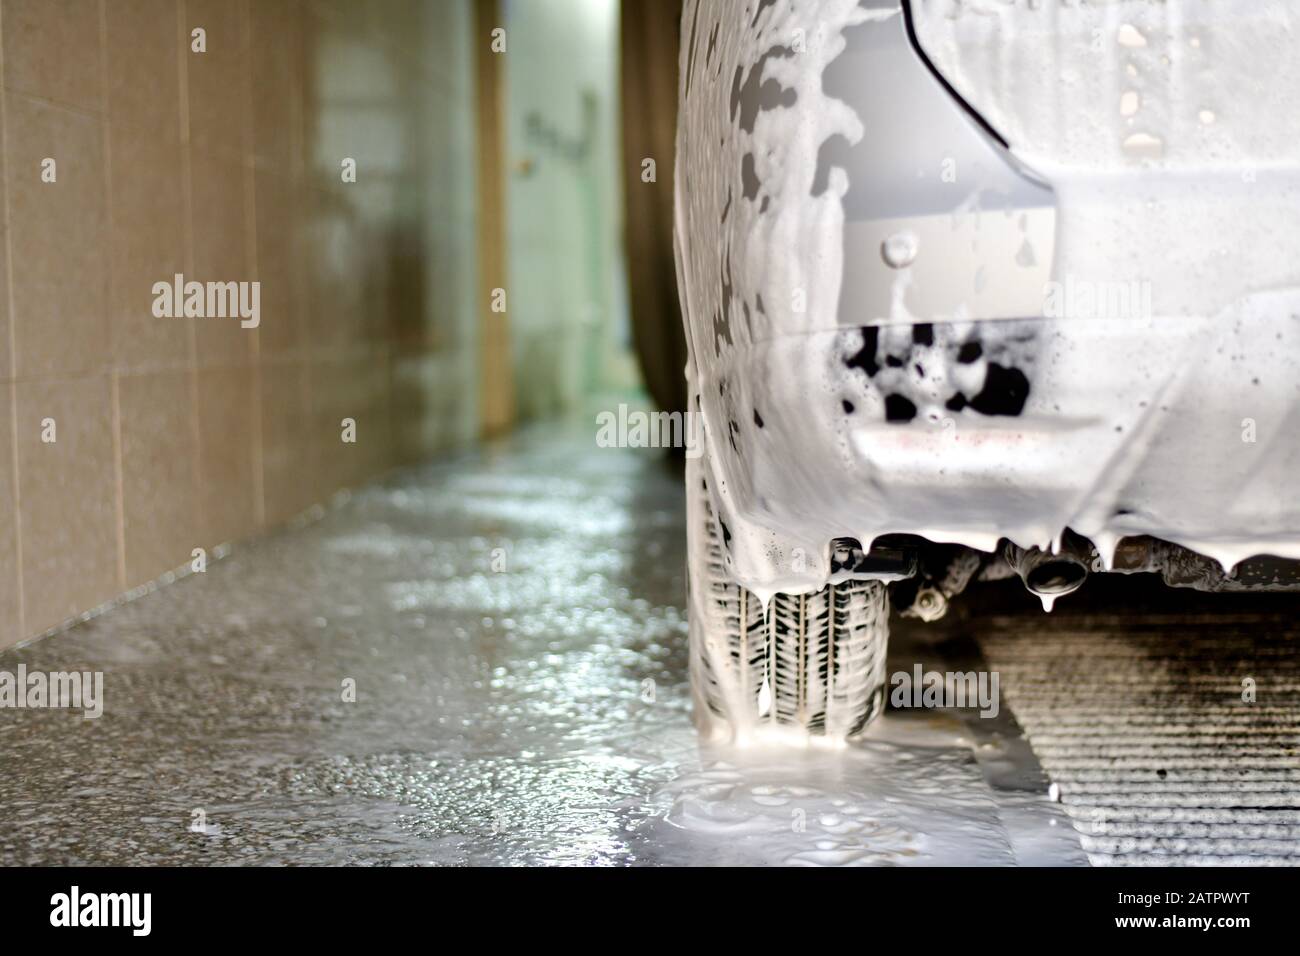 The car in soap foam, a fragment of the rear bumper and wheel, stands wraps on the soapy surface with a drain. Stock Photo